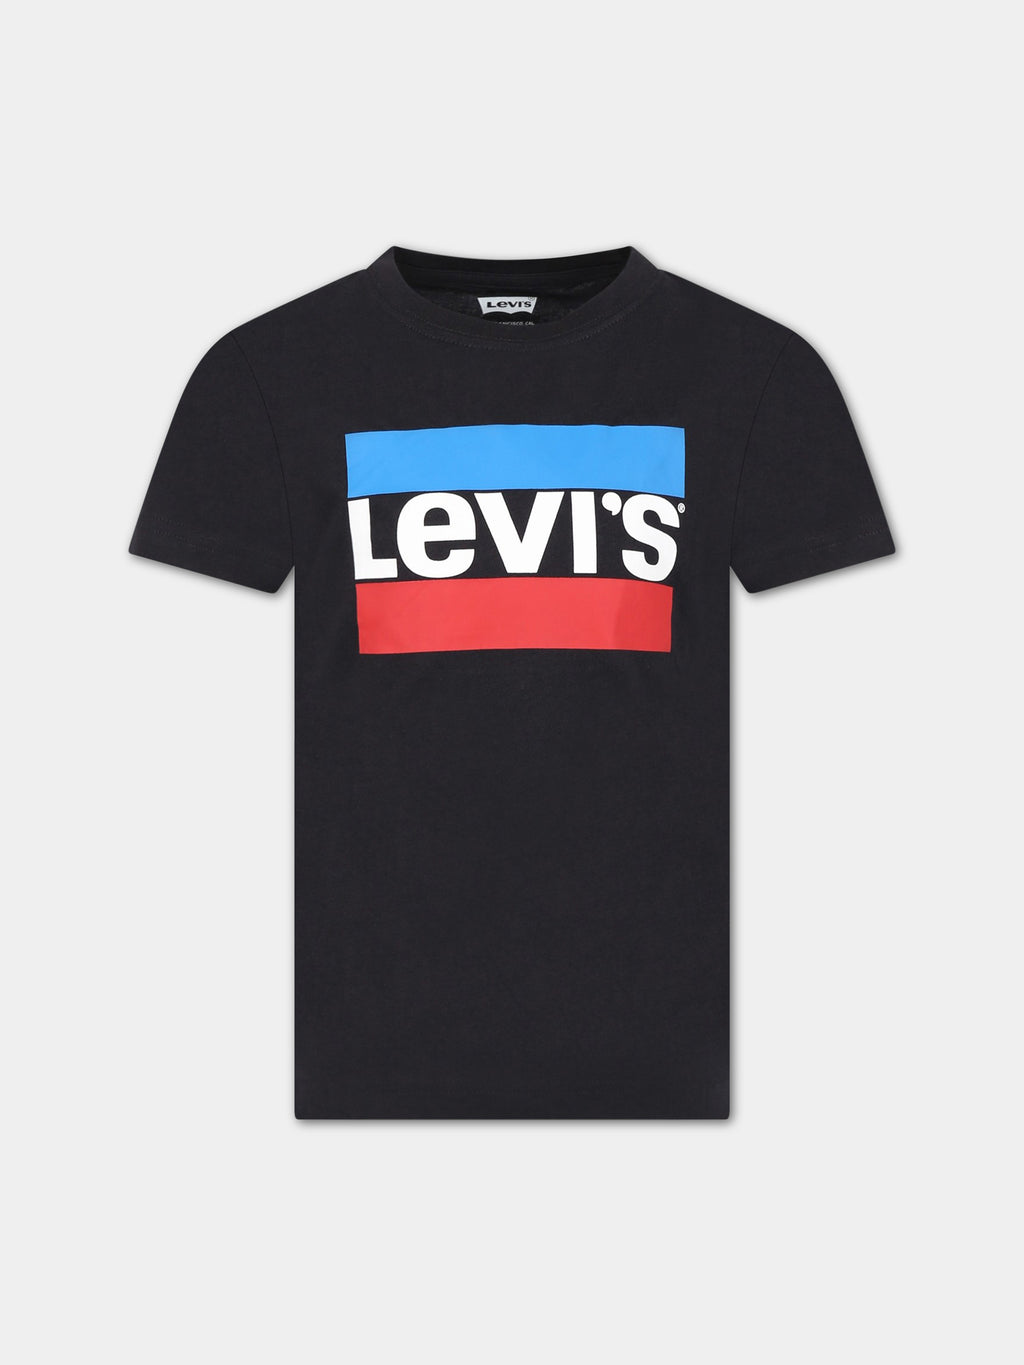 Black t-shirt for kids with logo